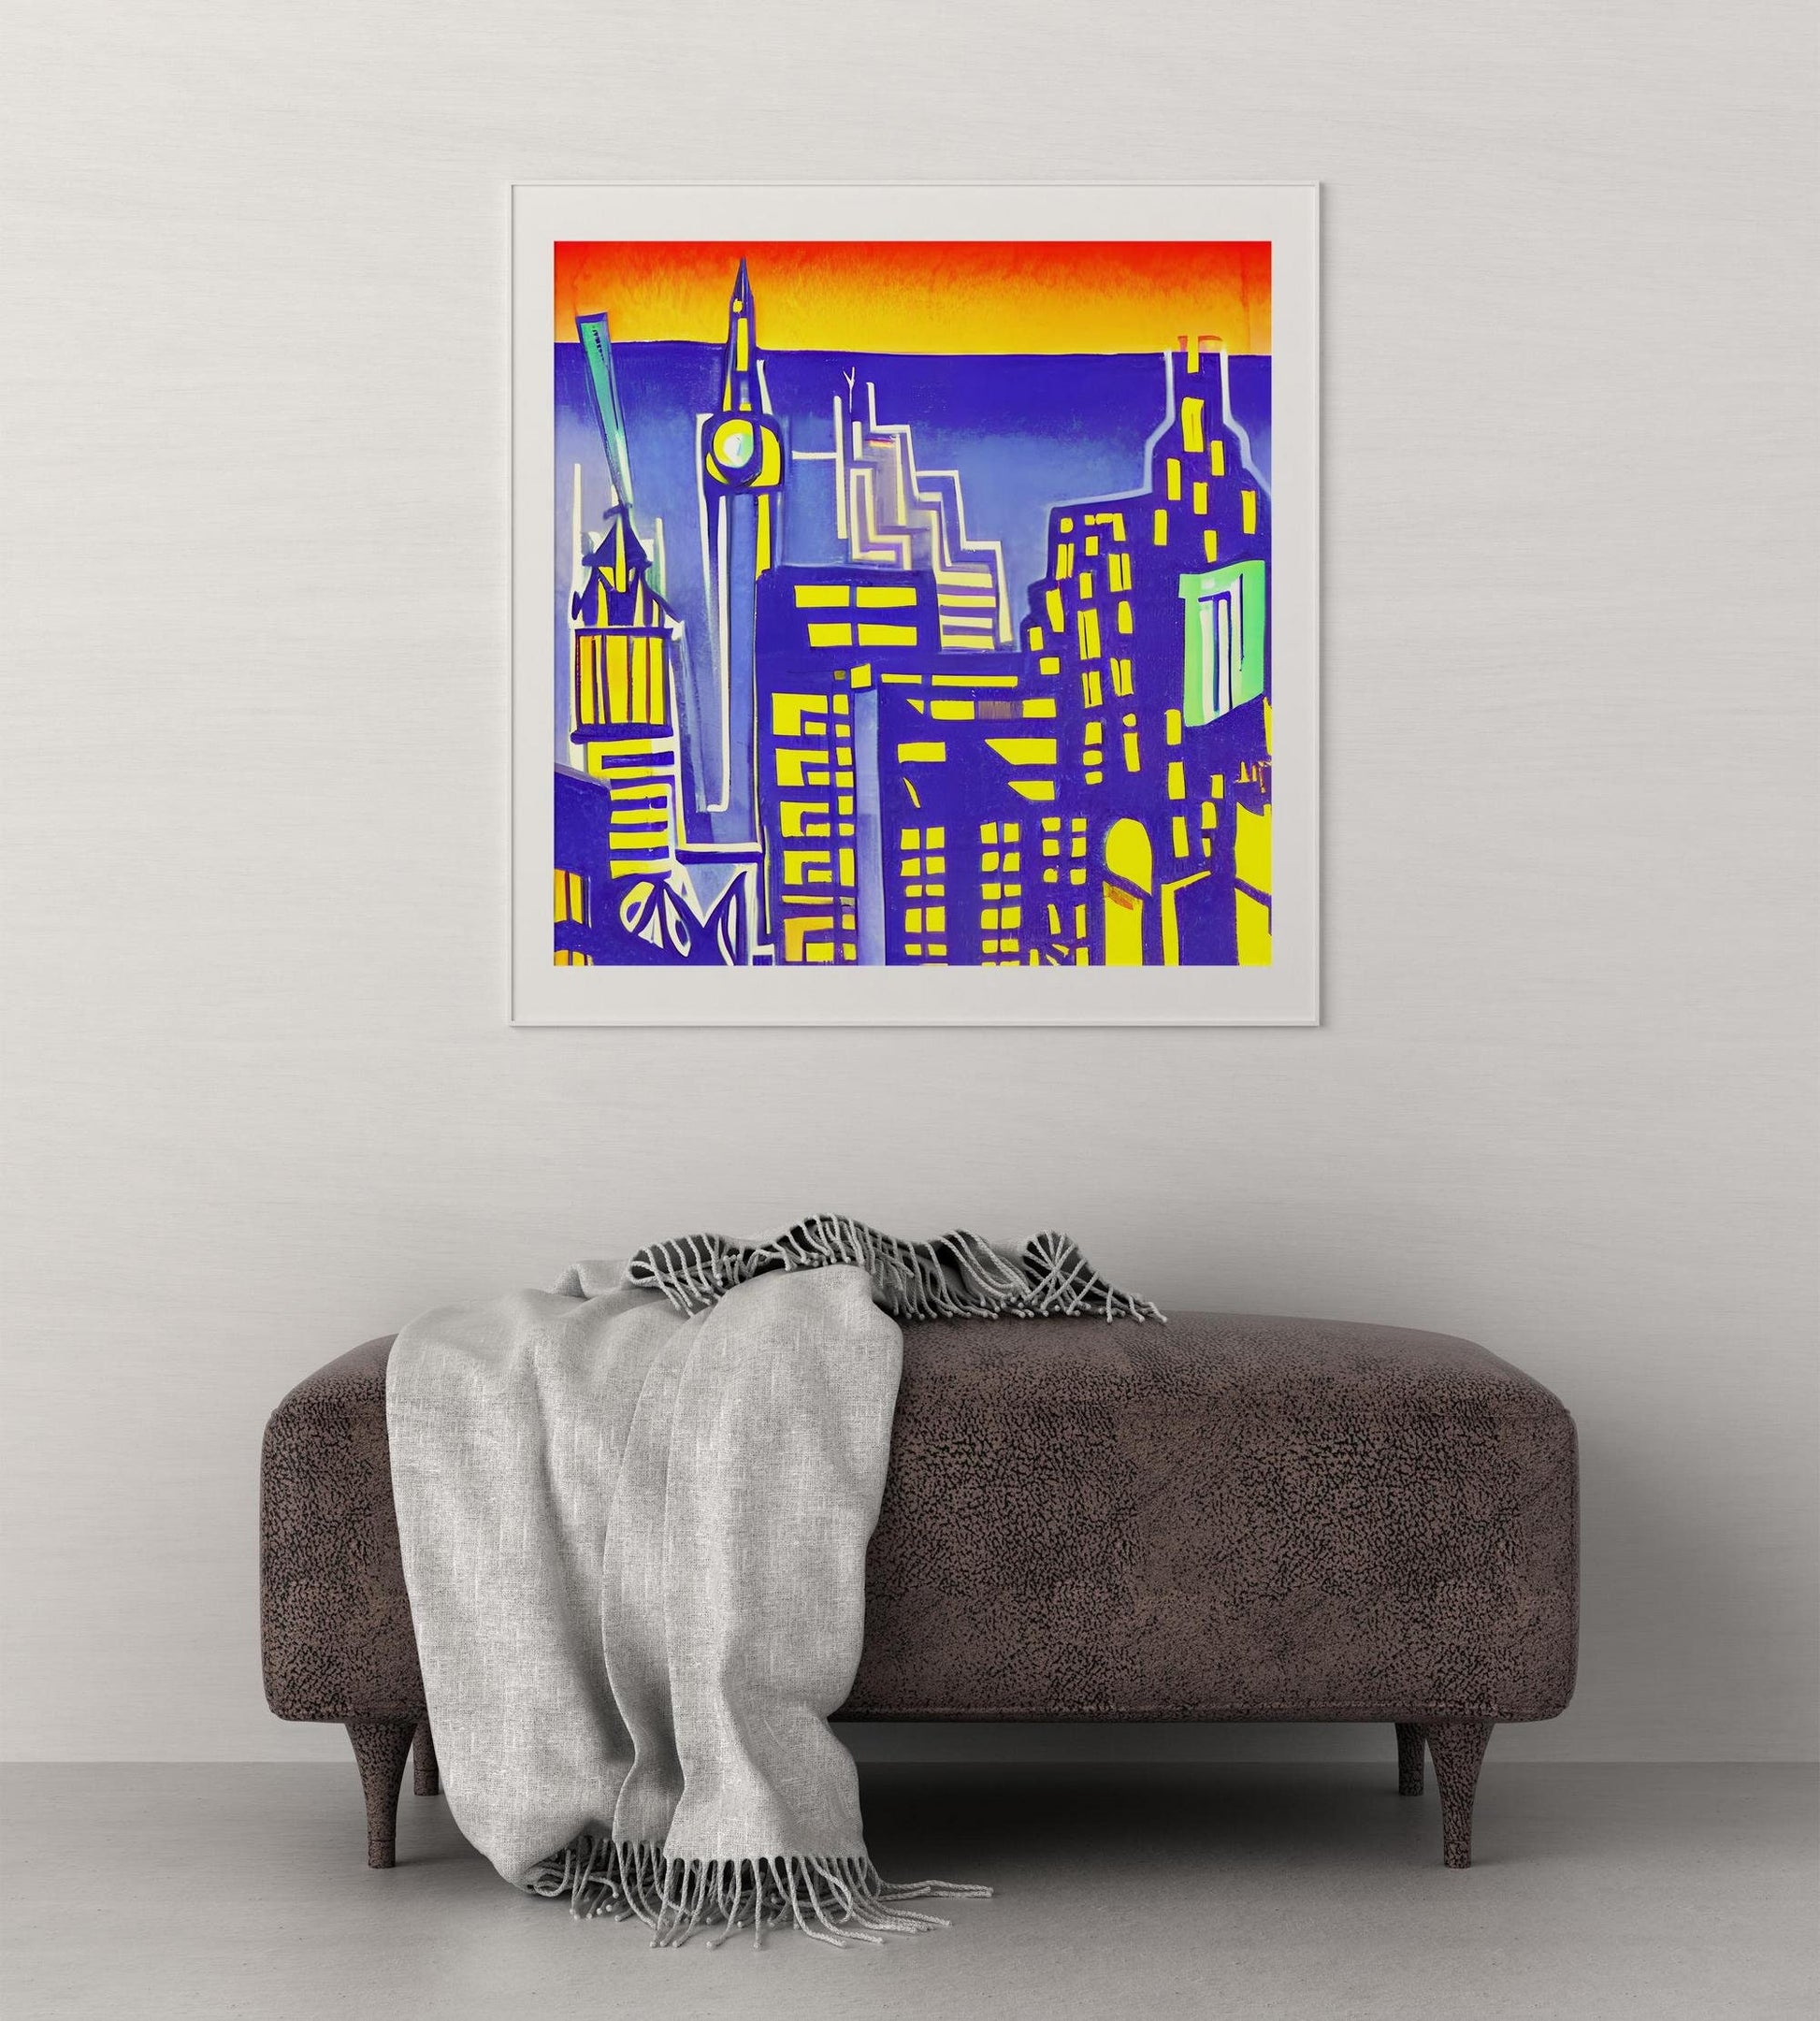 London City Night View, England, Wall Prints, Fantasy Travel Poster, Travel Poster, United Kingdom, Fashion Wall Art Print, Gift For Her